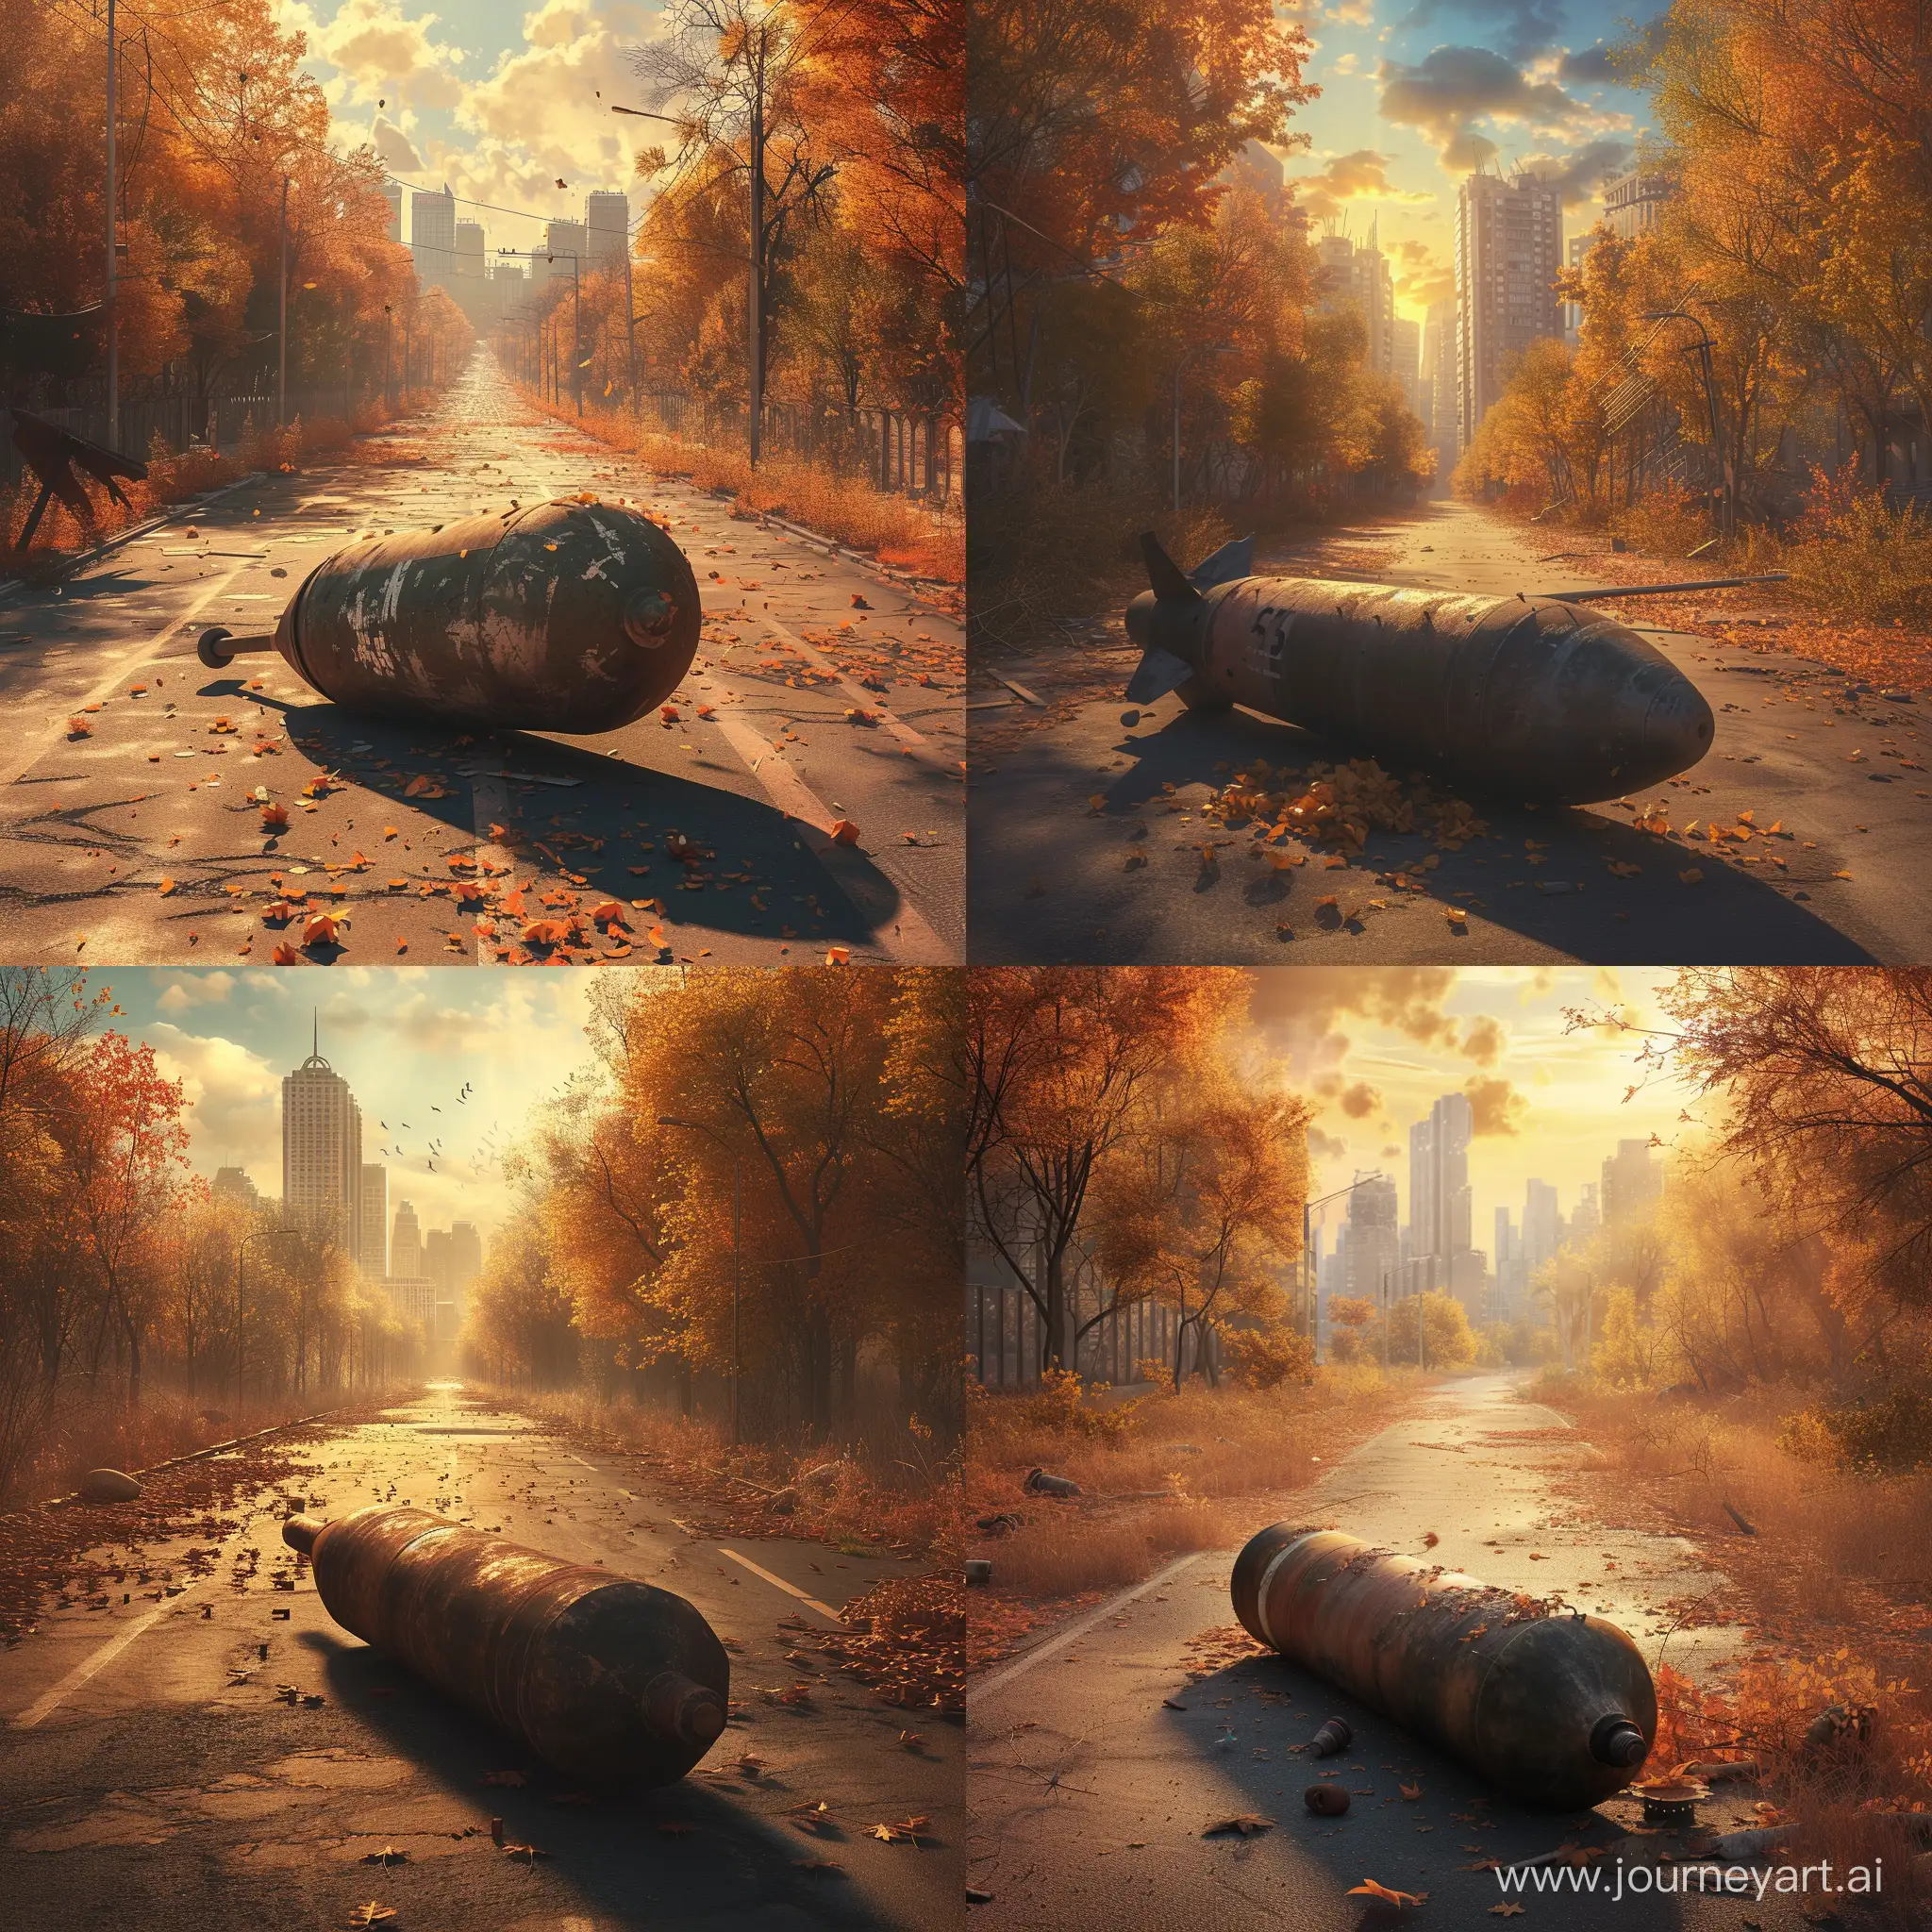 Unexploded-WWII-Bomb-Rests-in-Abandoned-City-Under-Autumn-Sun